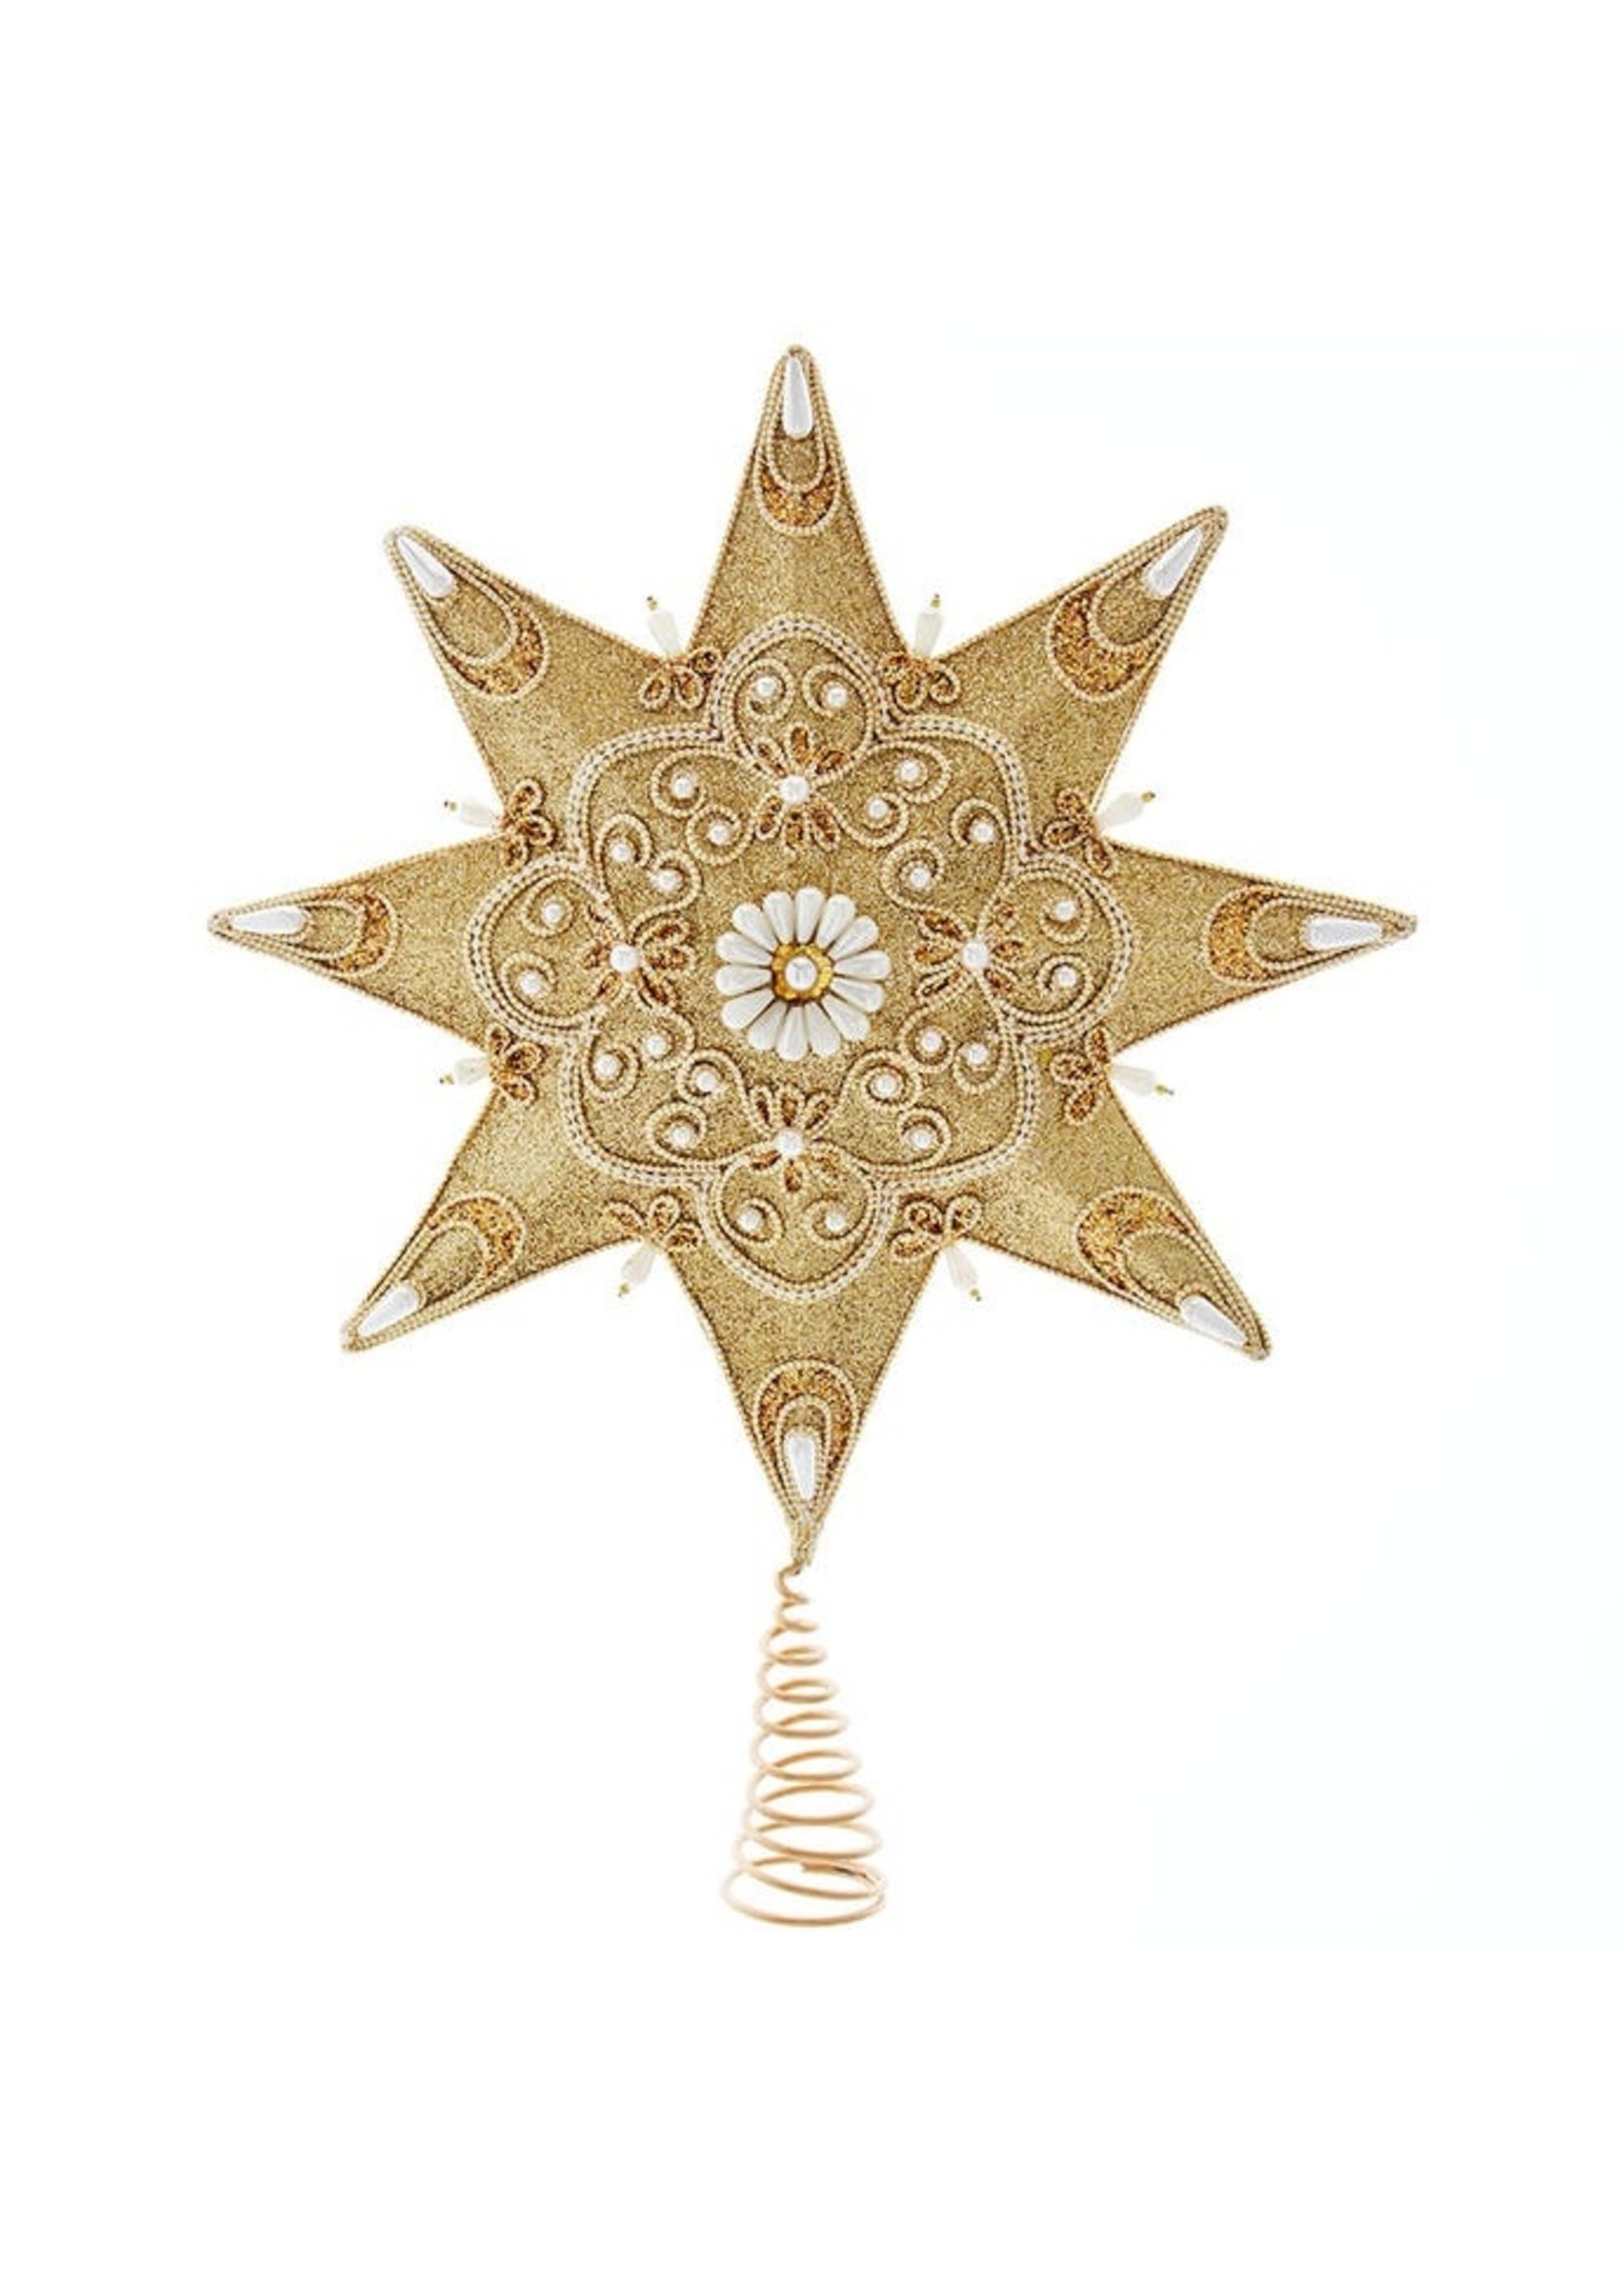 16" unlit pearl and gold shimmer star treetop